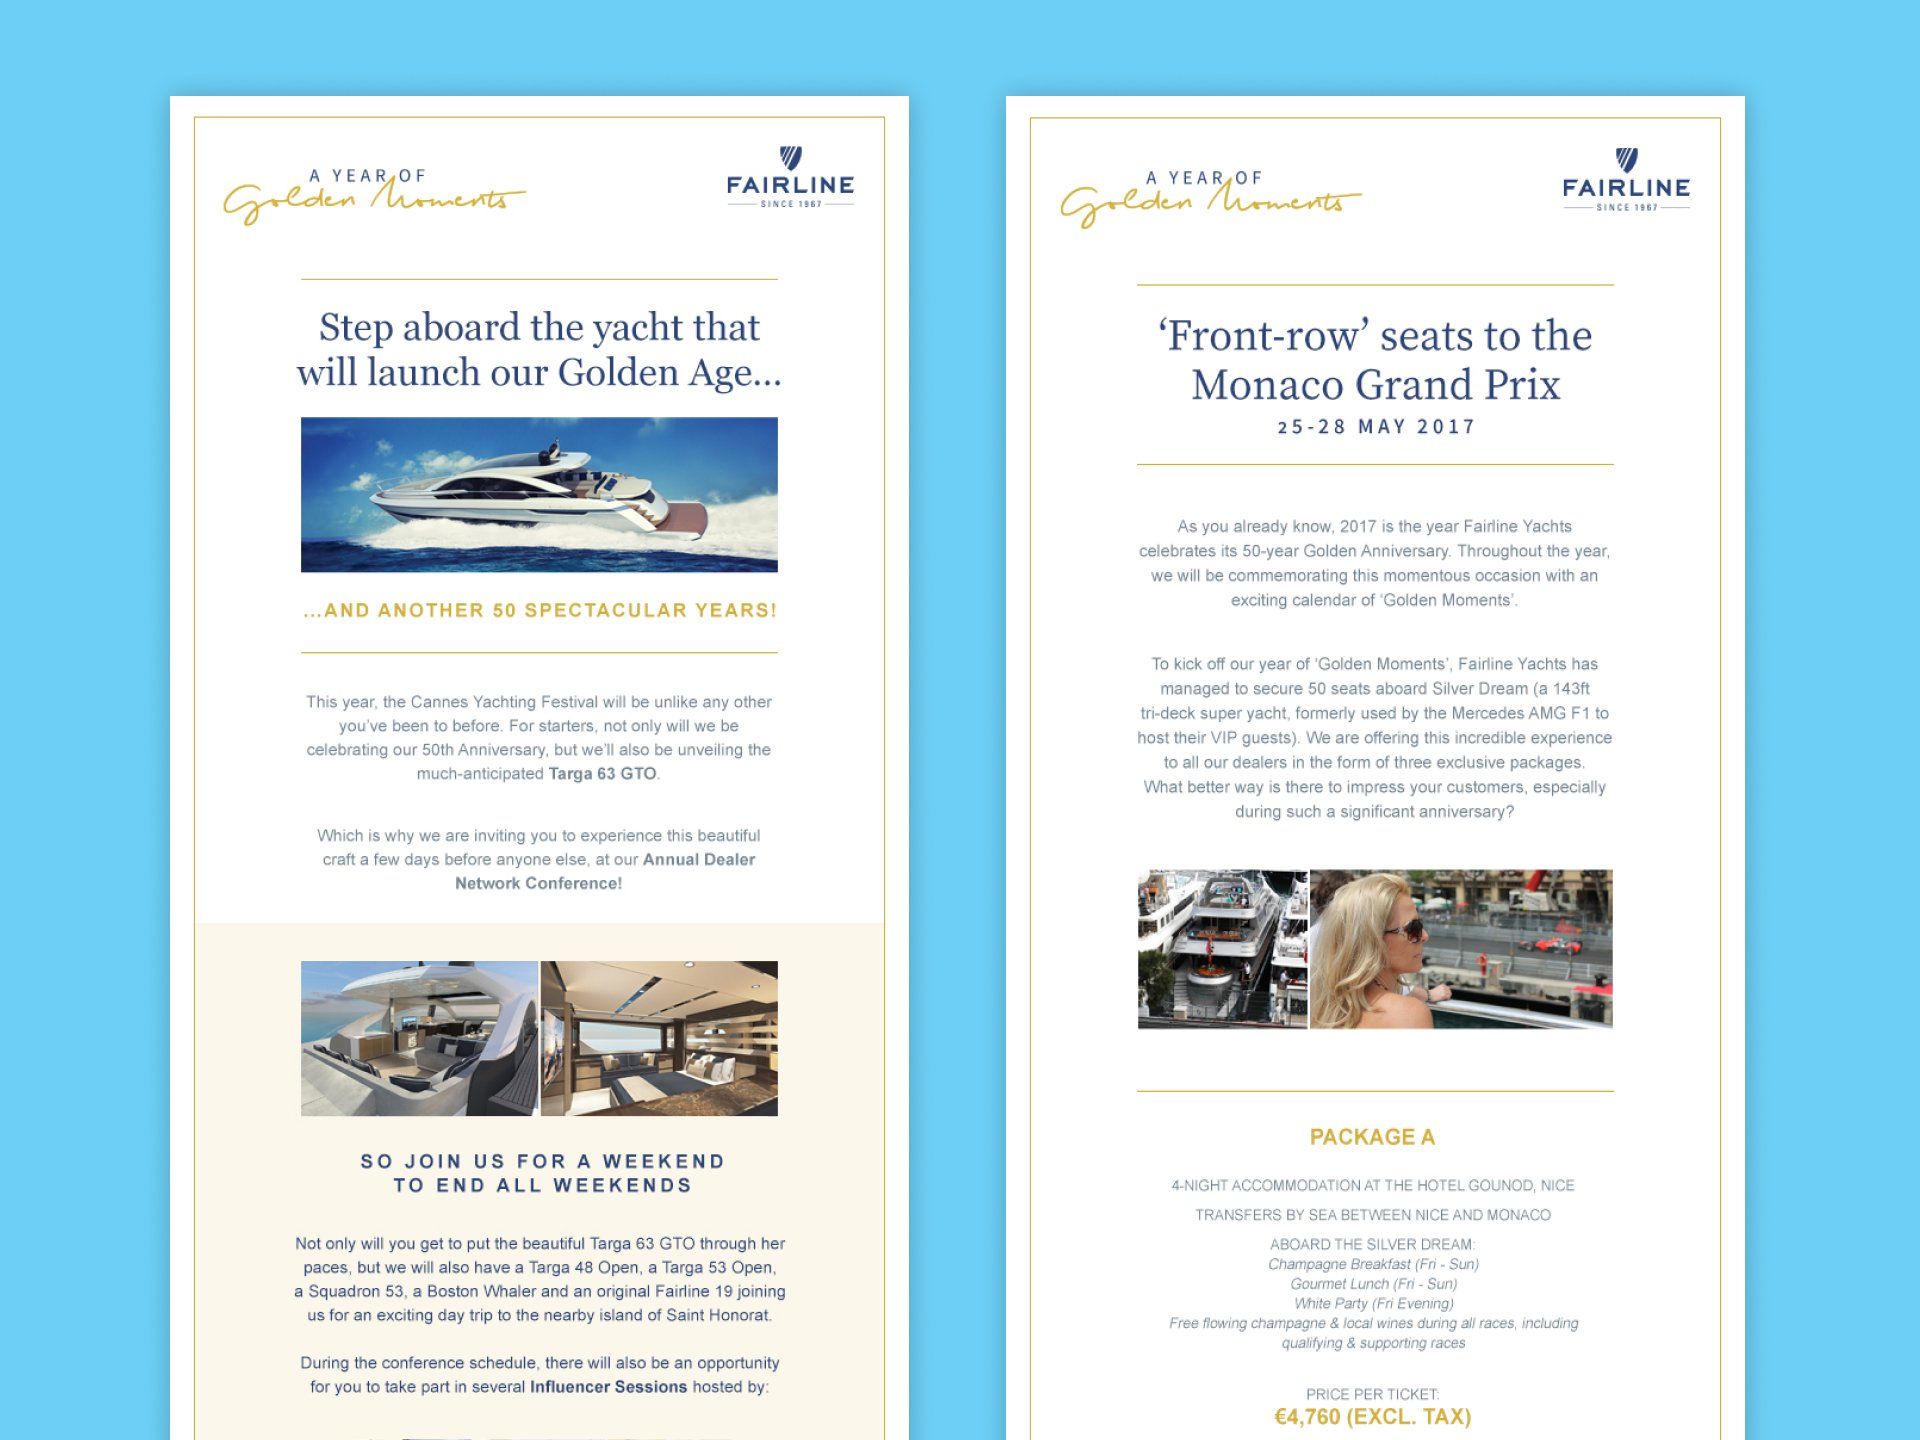 Email marketing for Fairline Yachts' 